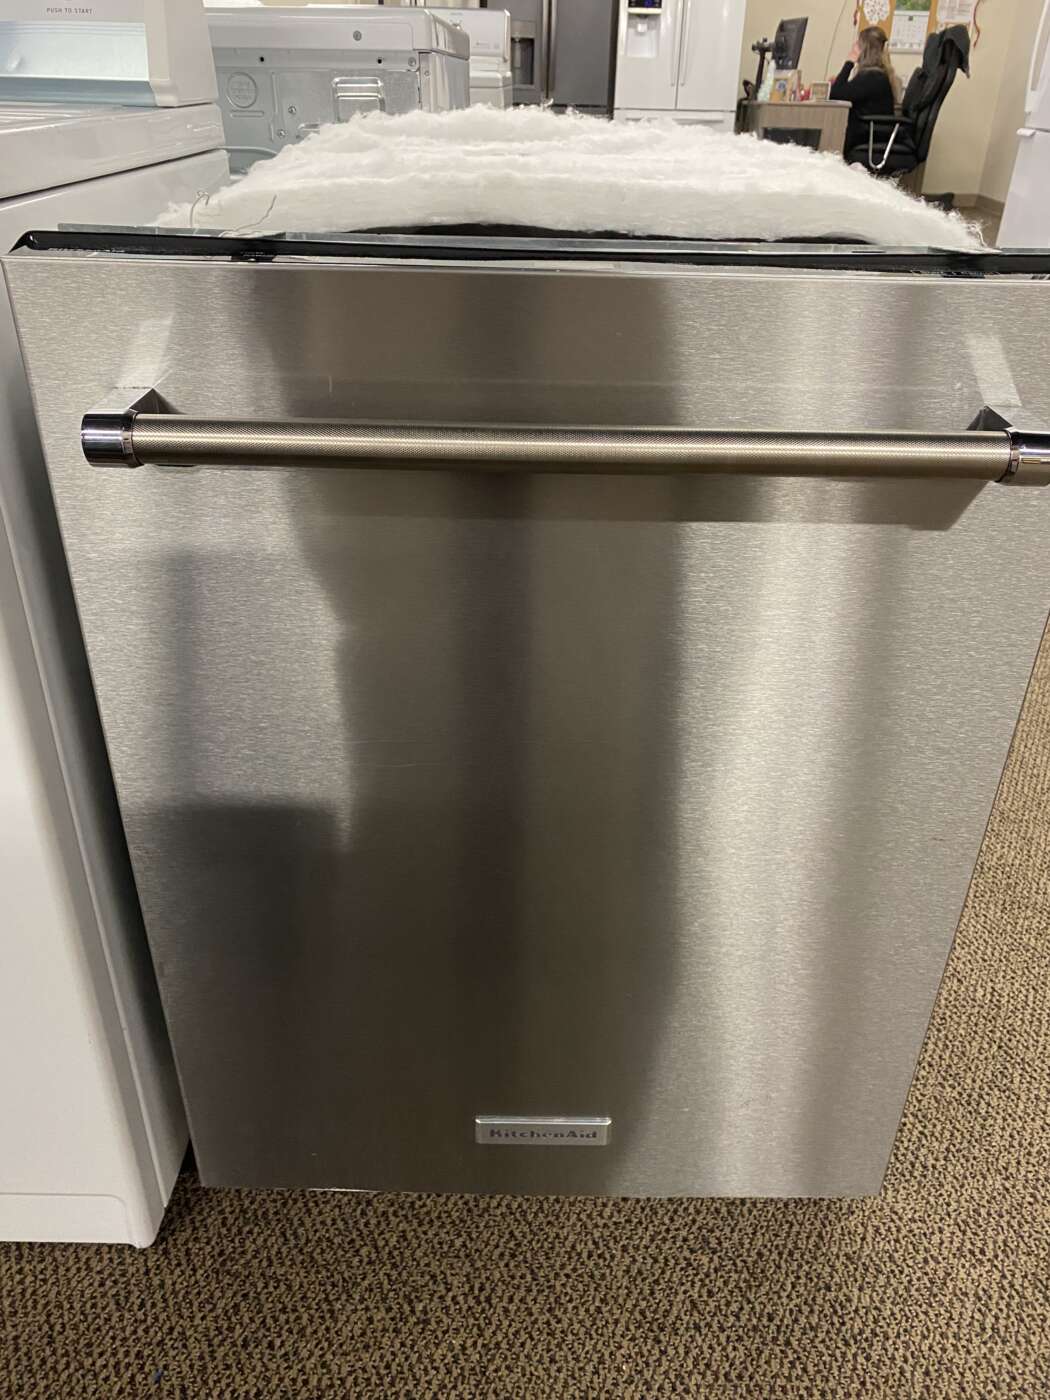 Reconditioned KITCHENAID Stainless-Tub Built-In Dishwasher With 3-Racks – Stainless